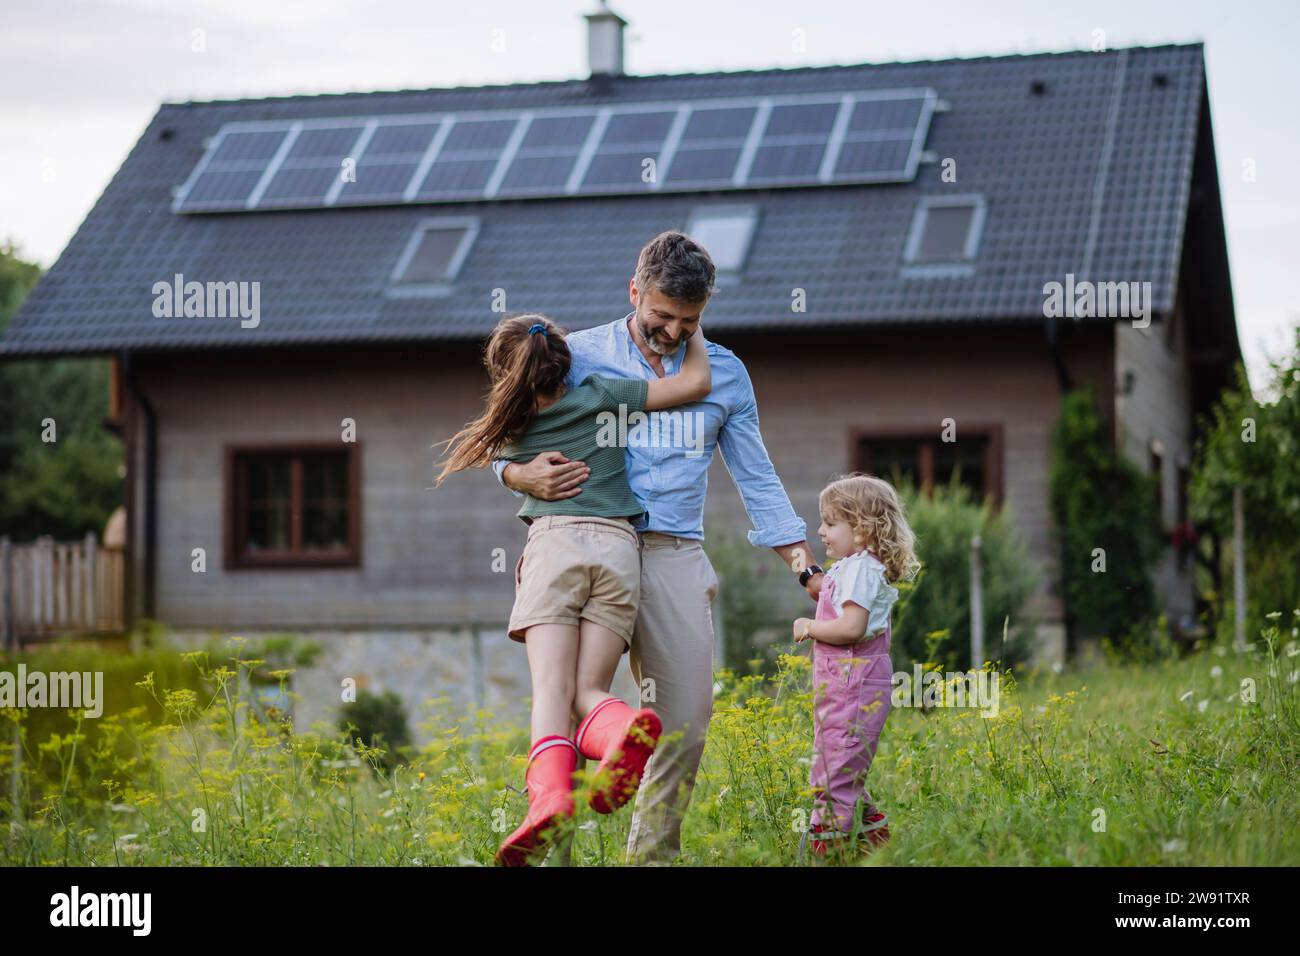 Father and daughters having fun in front their family house with solar panels on the roof Stock Photo